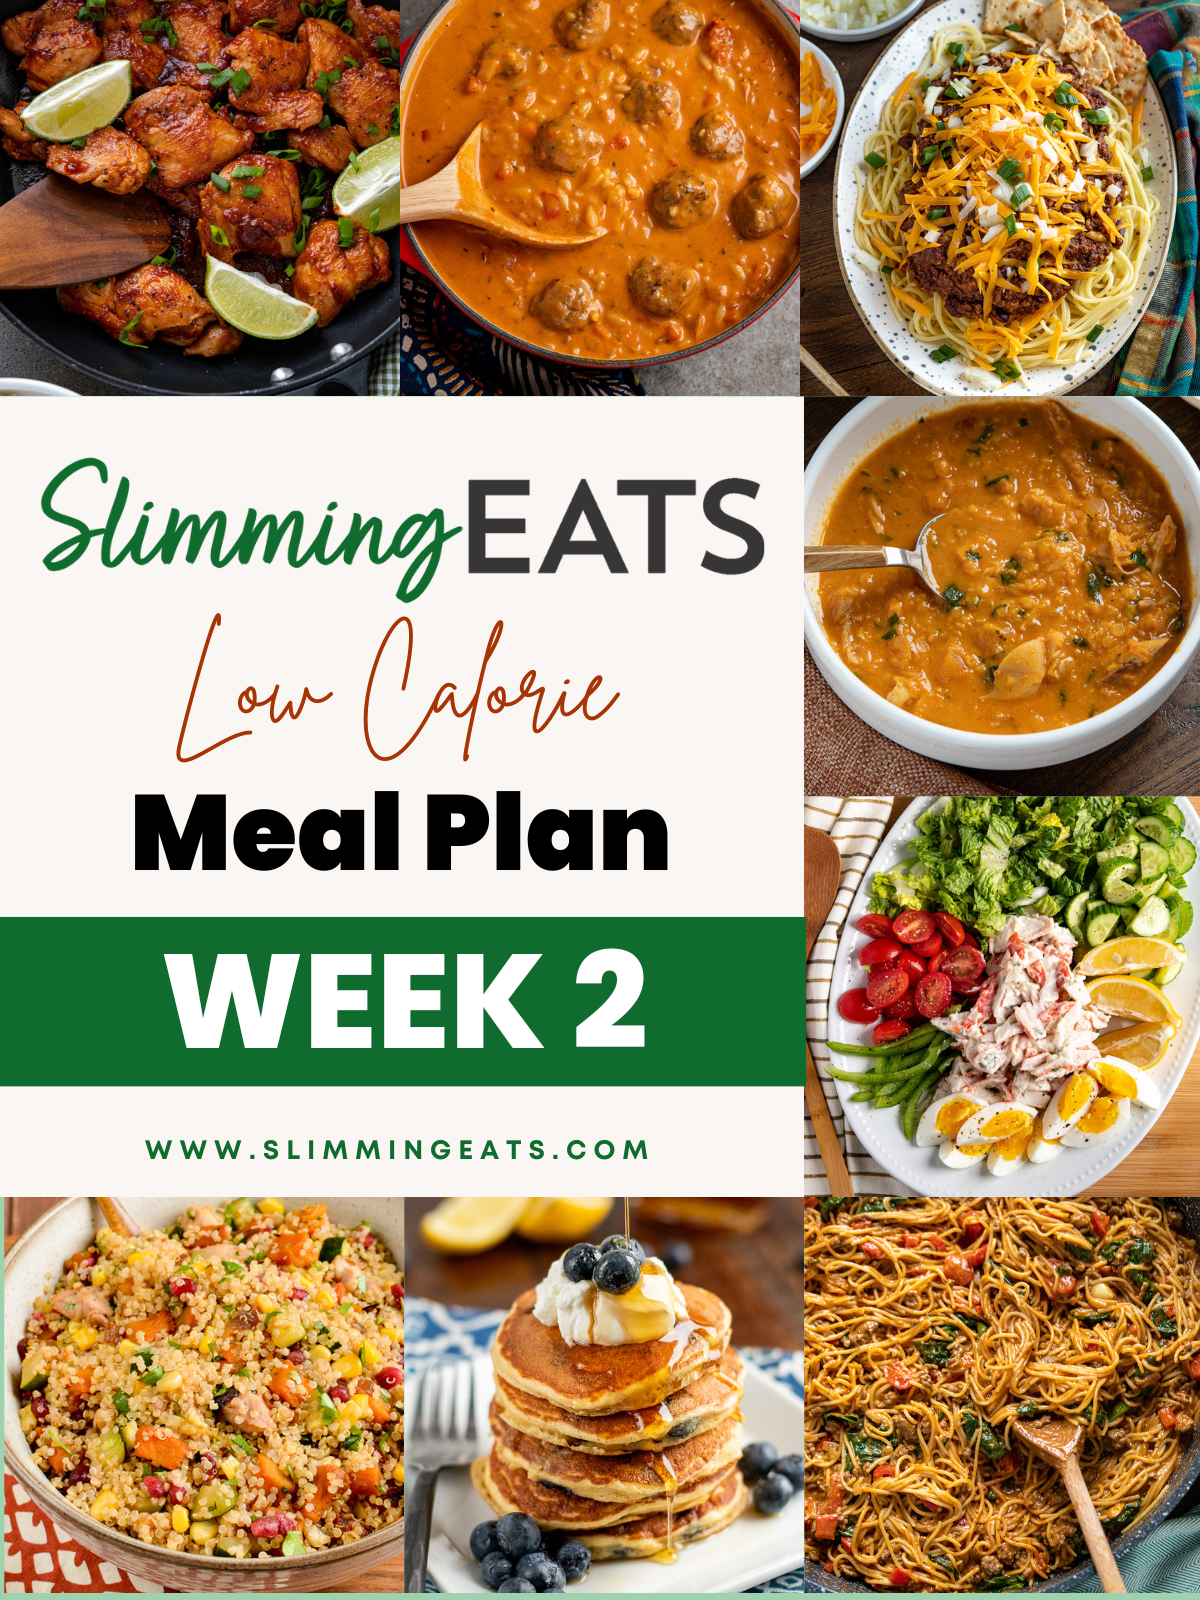 slimming eats meal plan week 2 featured images